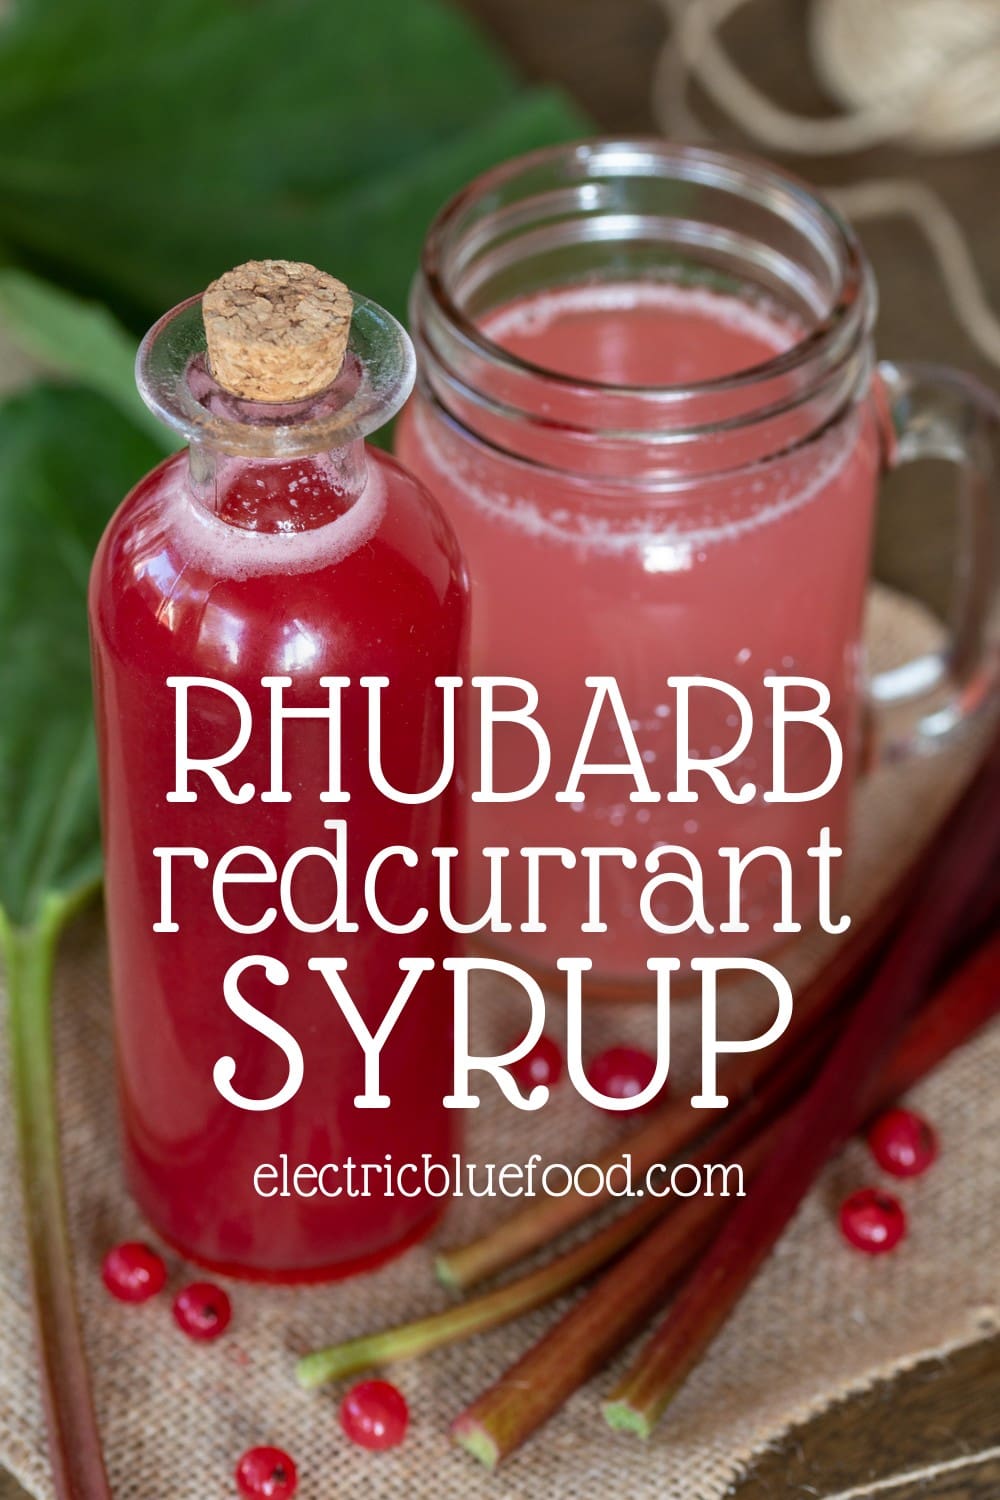 Homemade rhubarb and redcurrant syrup to use in drinks, cocktails or even to flavour hot tea.